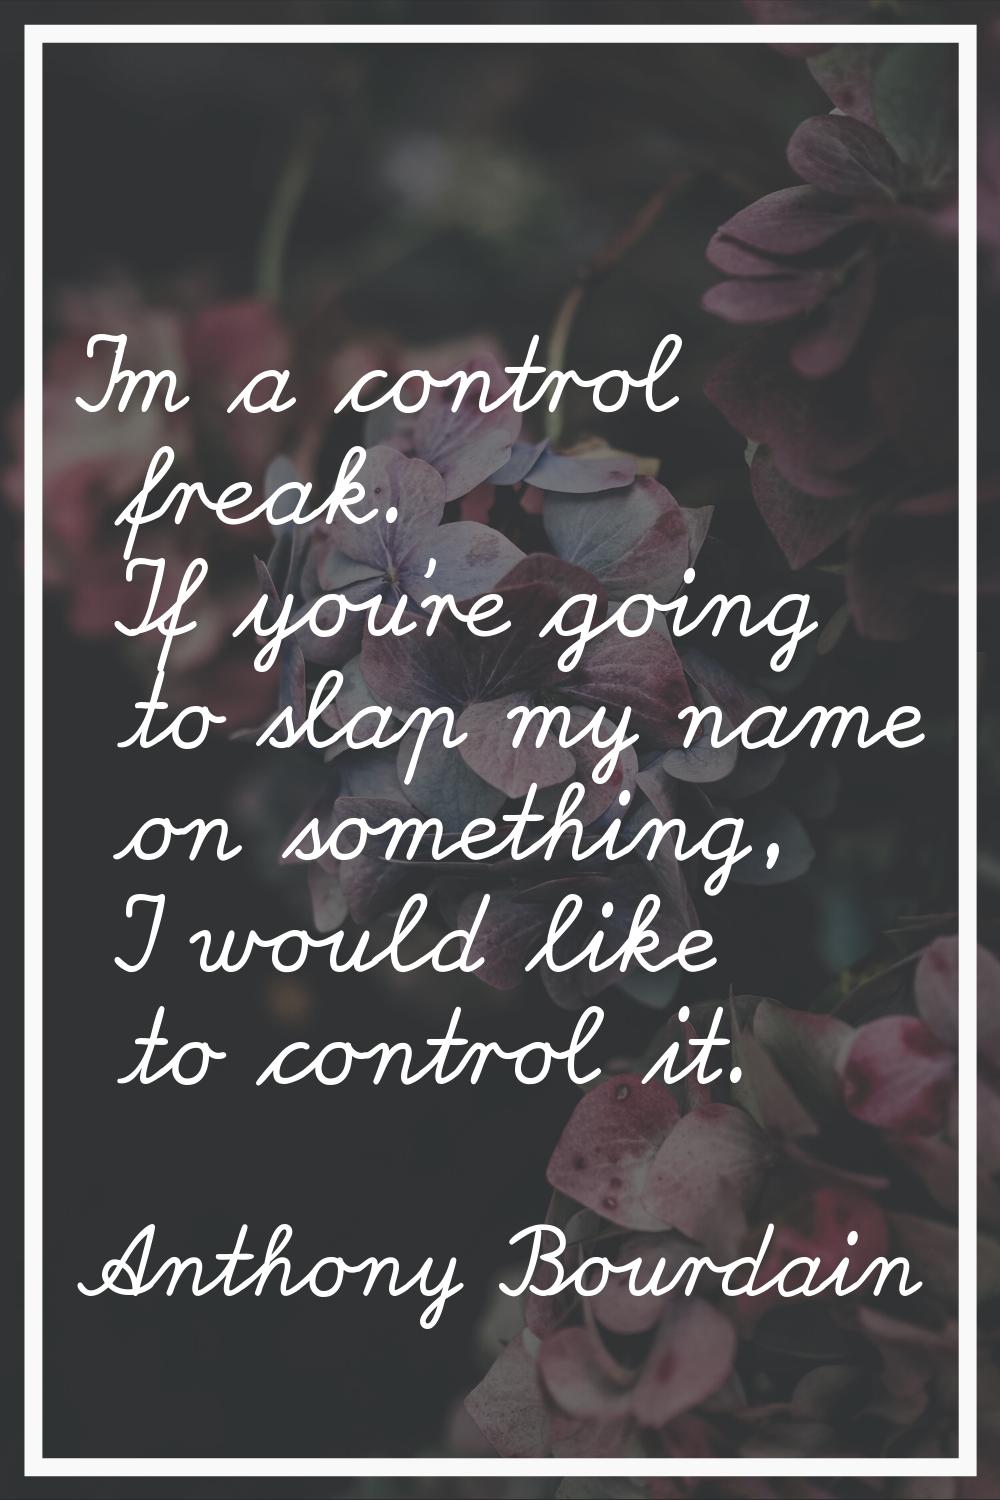 I'm a control freak. If you're going to slap my name on something, I would like to control it.